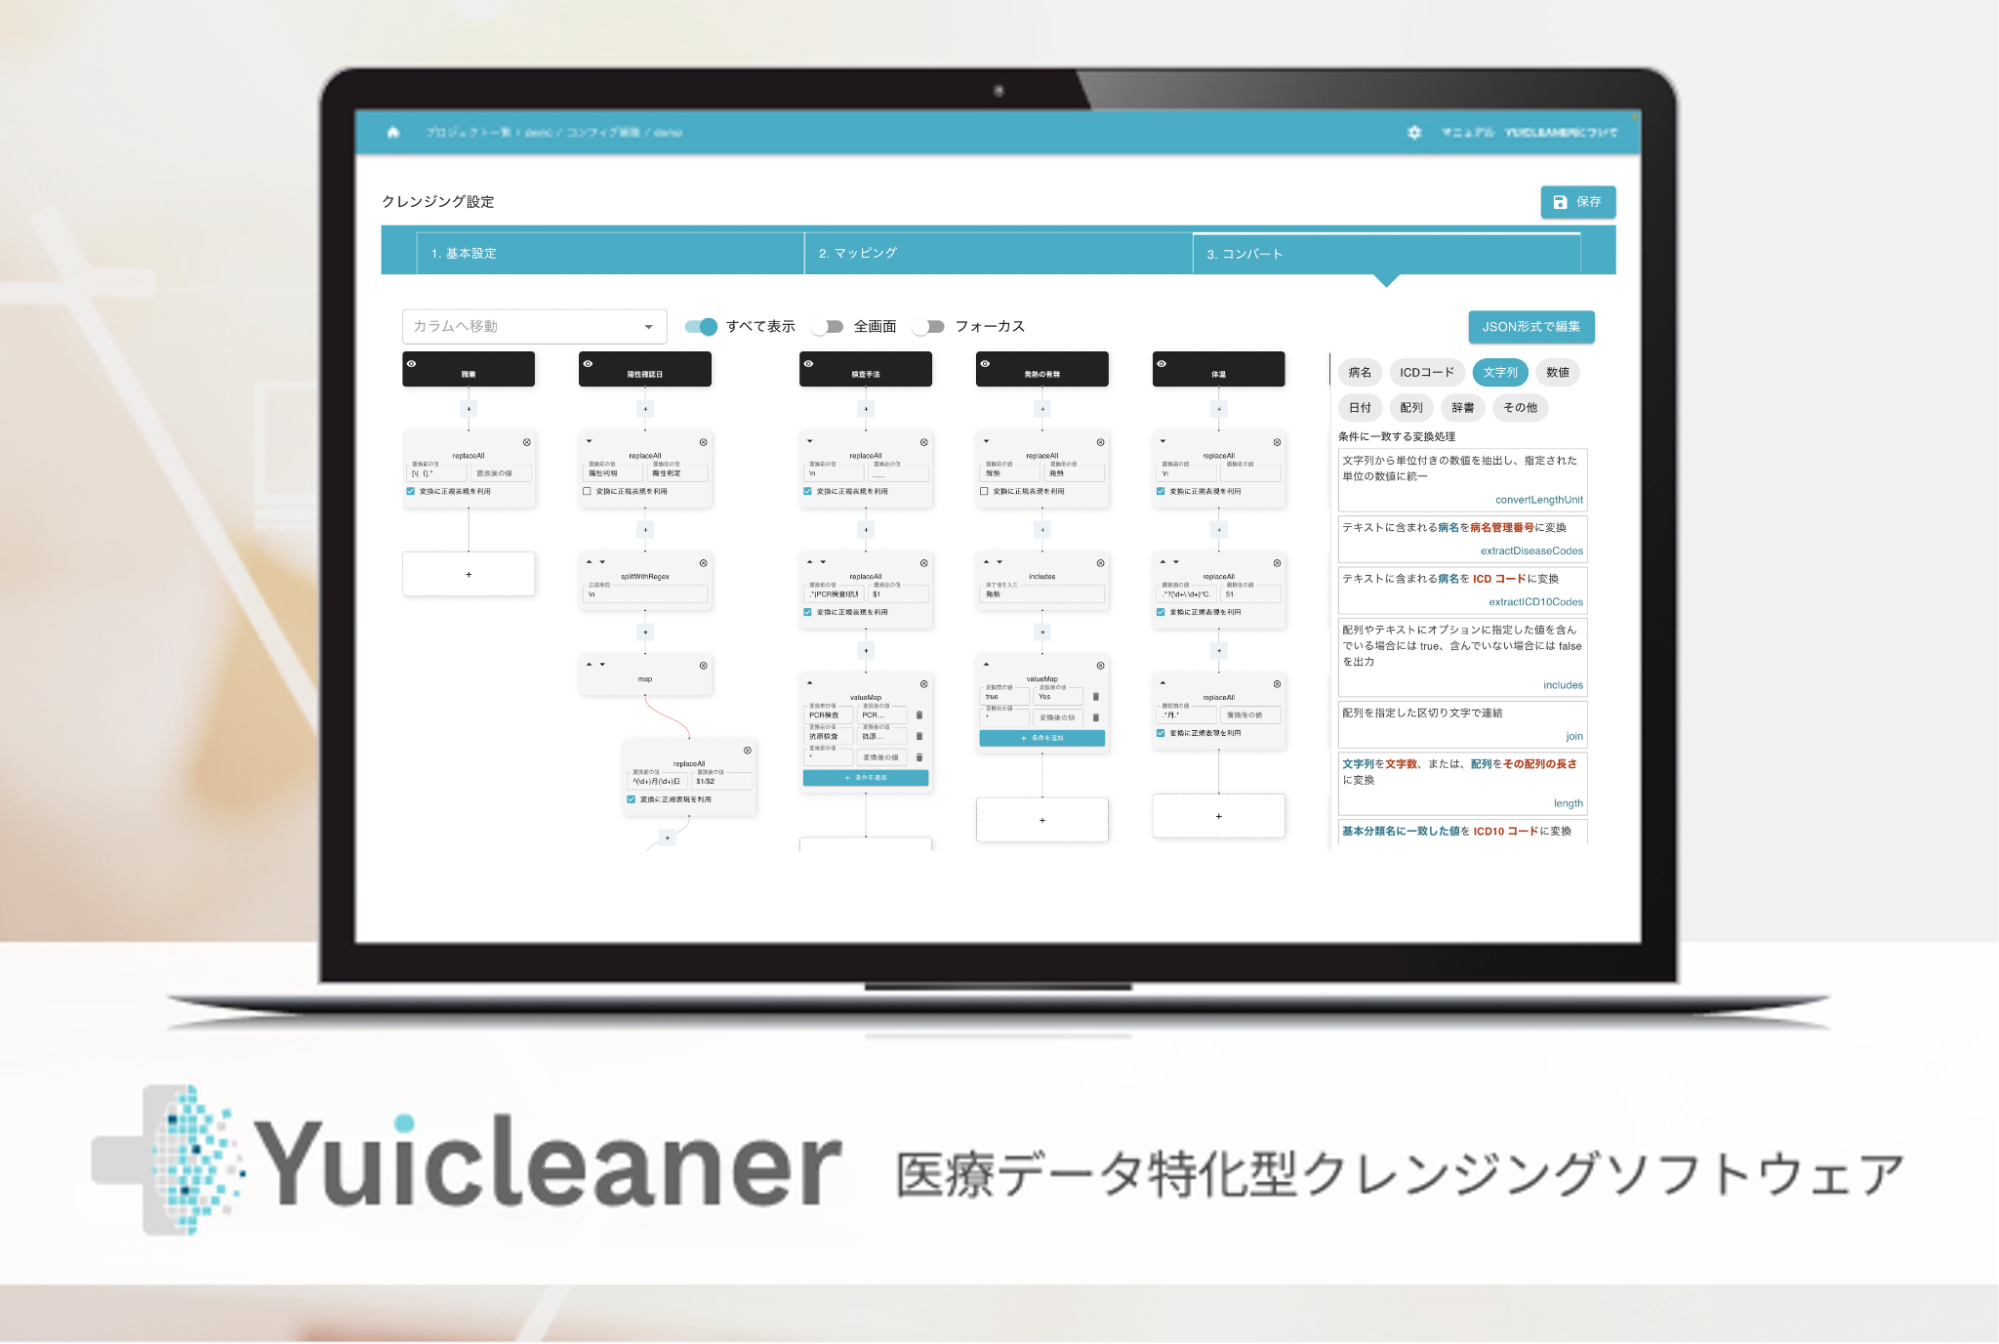 Yuicleaner sample image